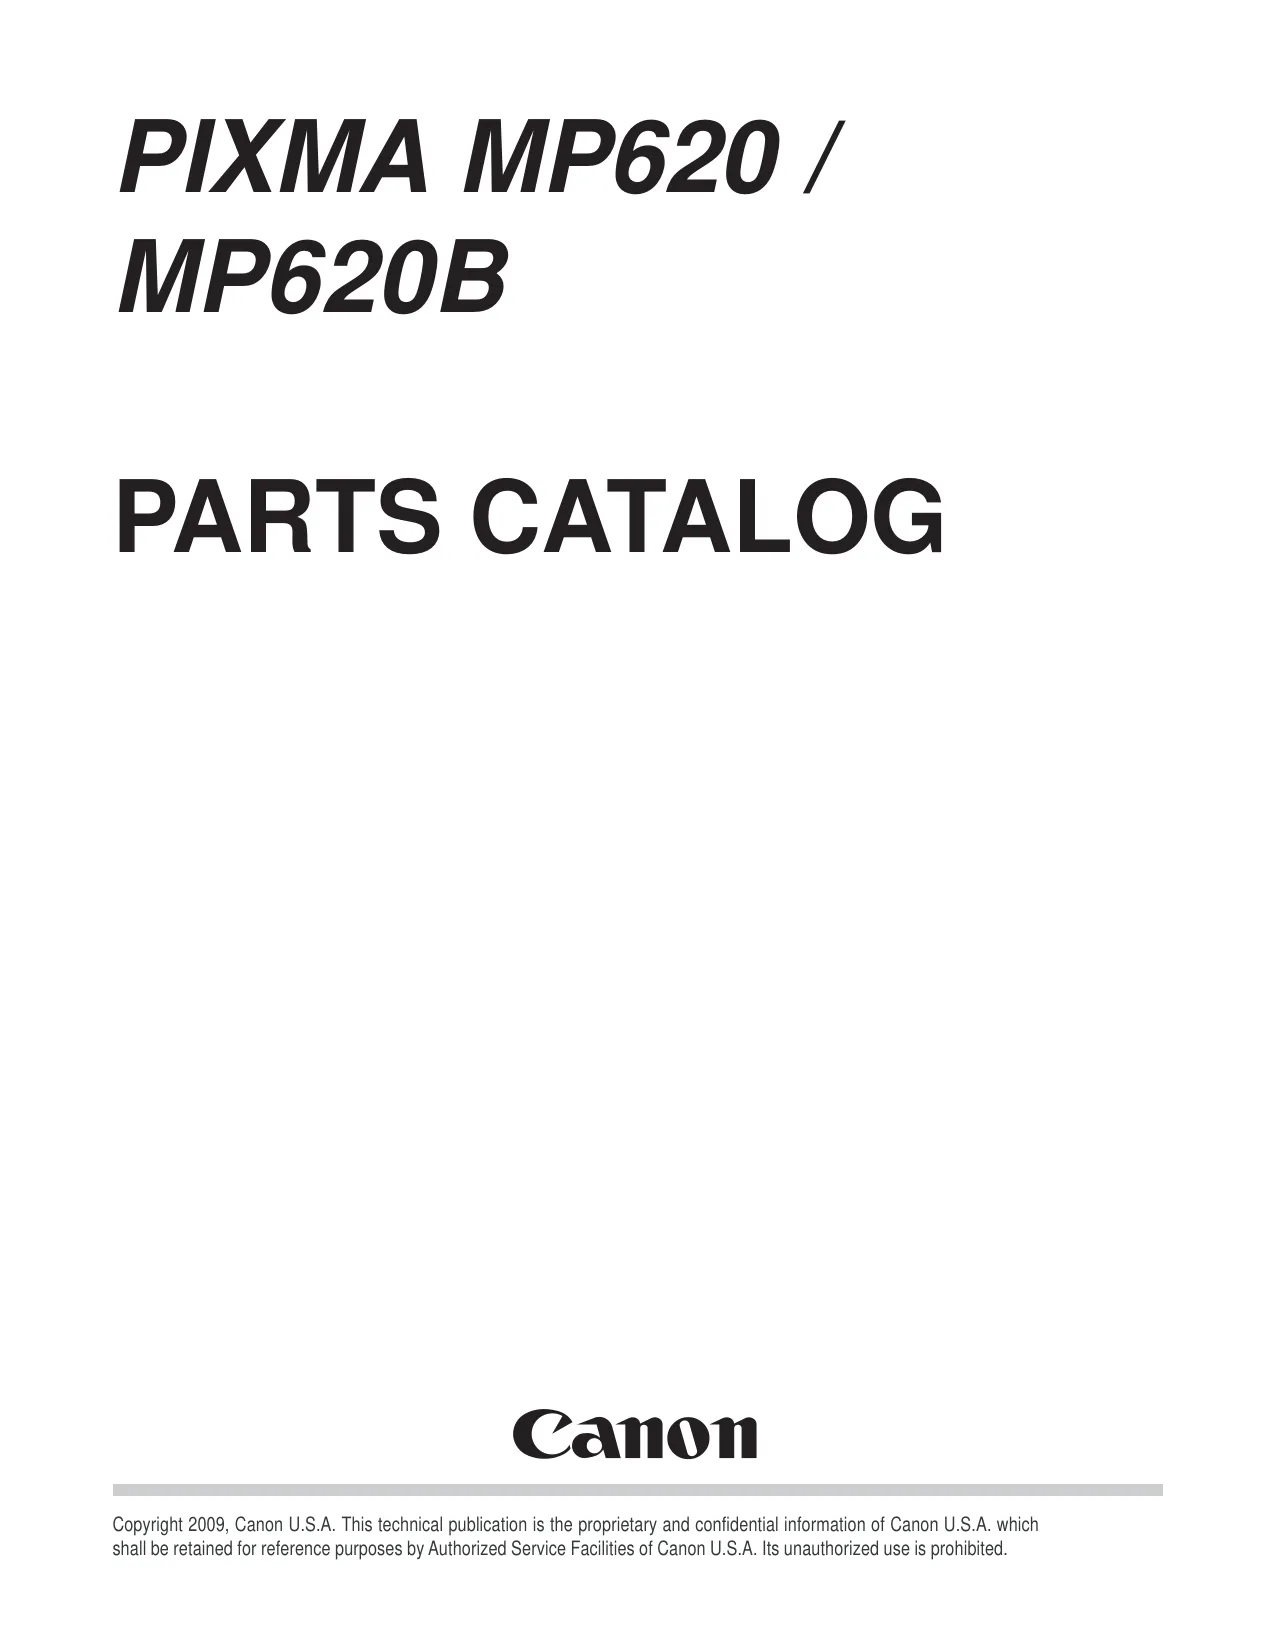 Canon Pixma MP620 + MP620B all-in-one inkjet photo printer manual Preview image 1